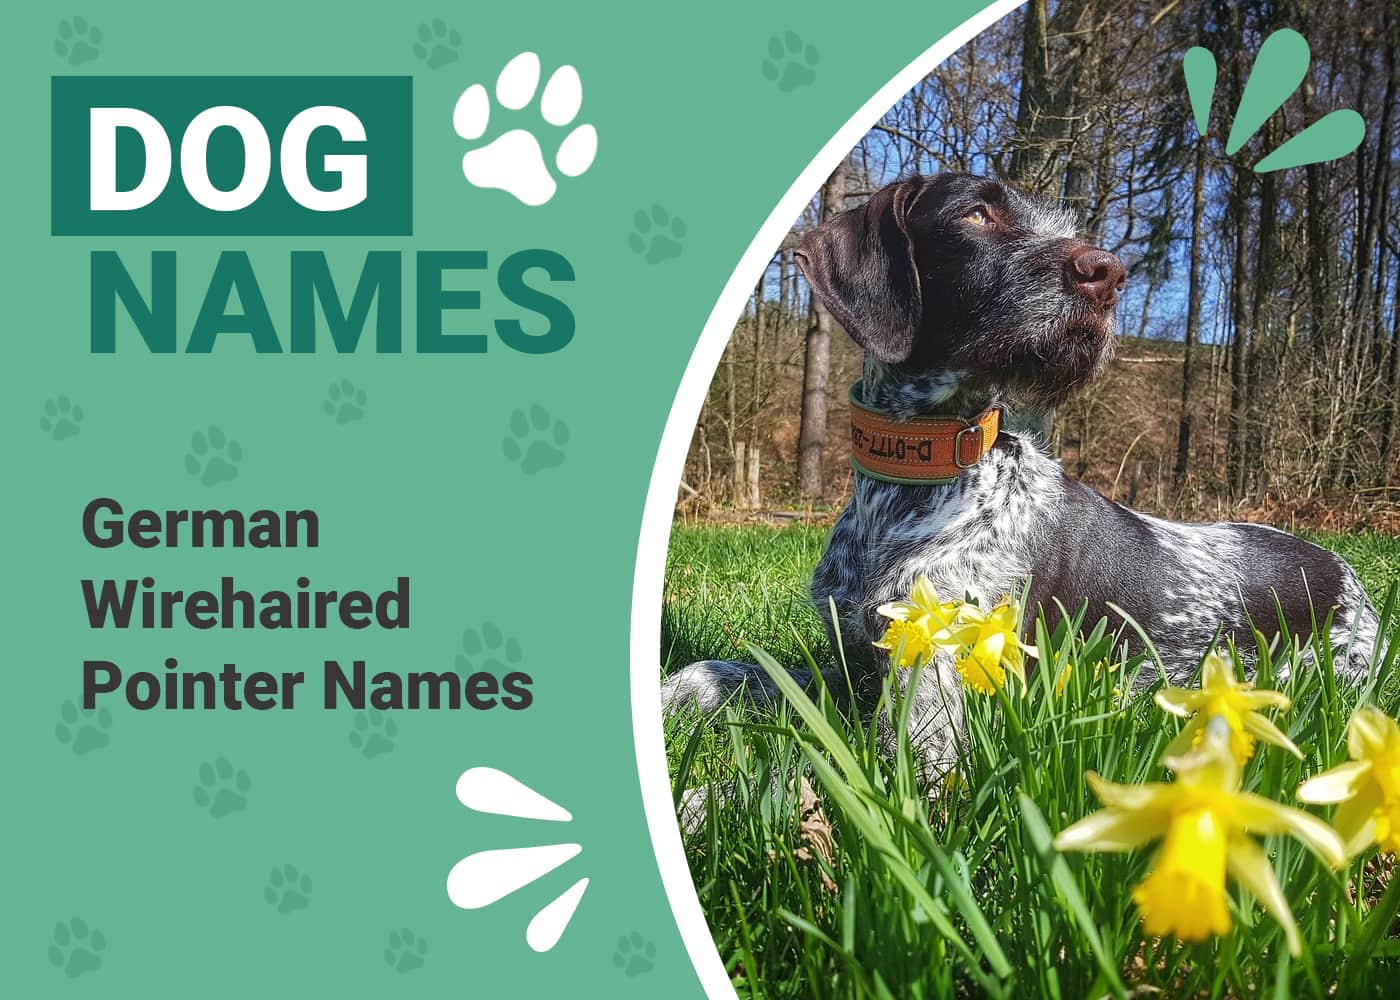 German Wirehaired Pointer Names